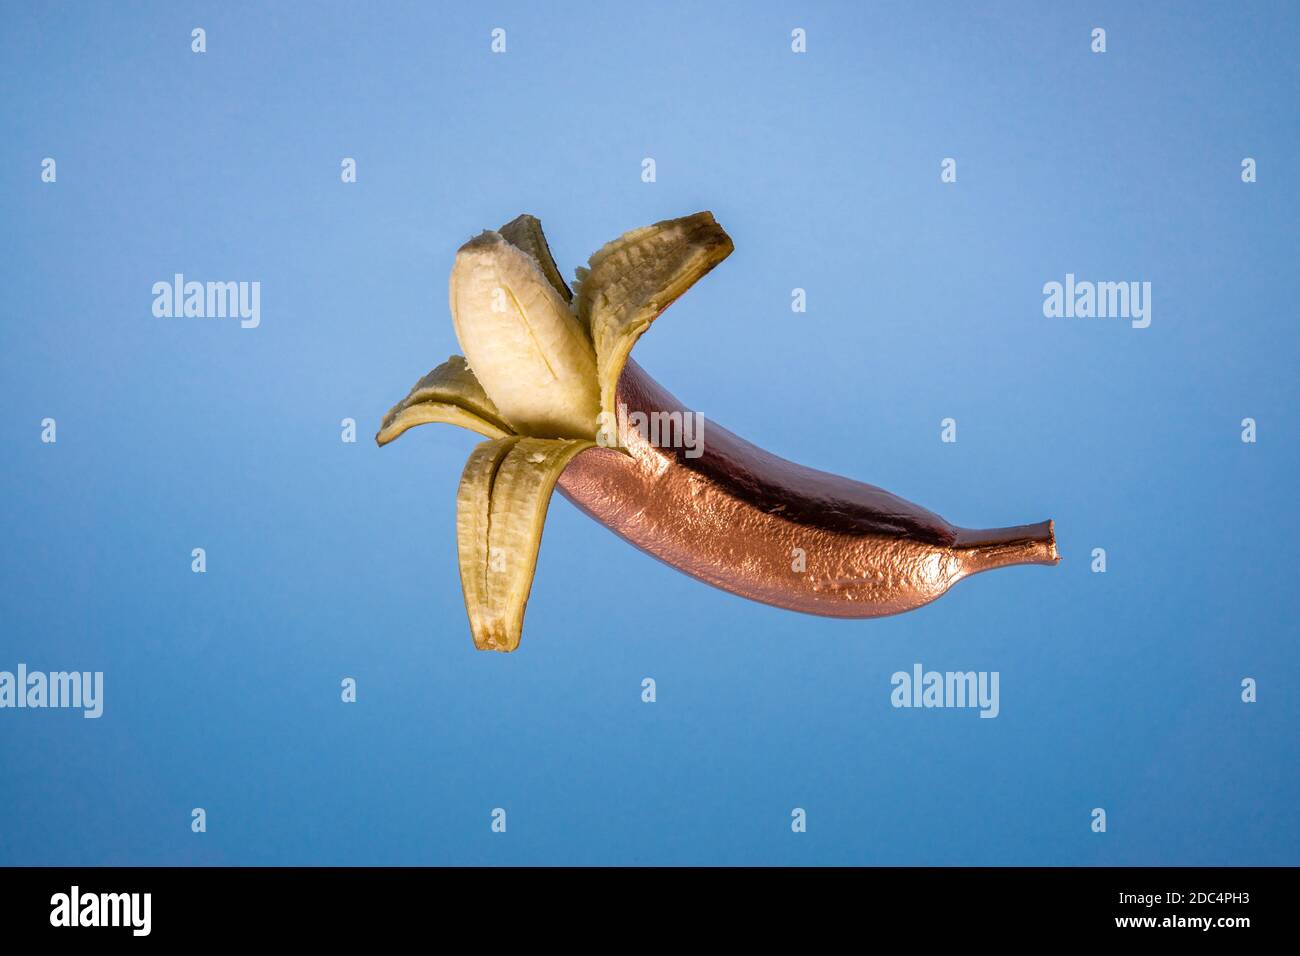 Gold floating pilled banana on blue background. Minimal food concept Stock Photo